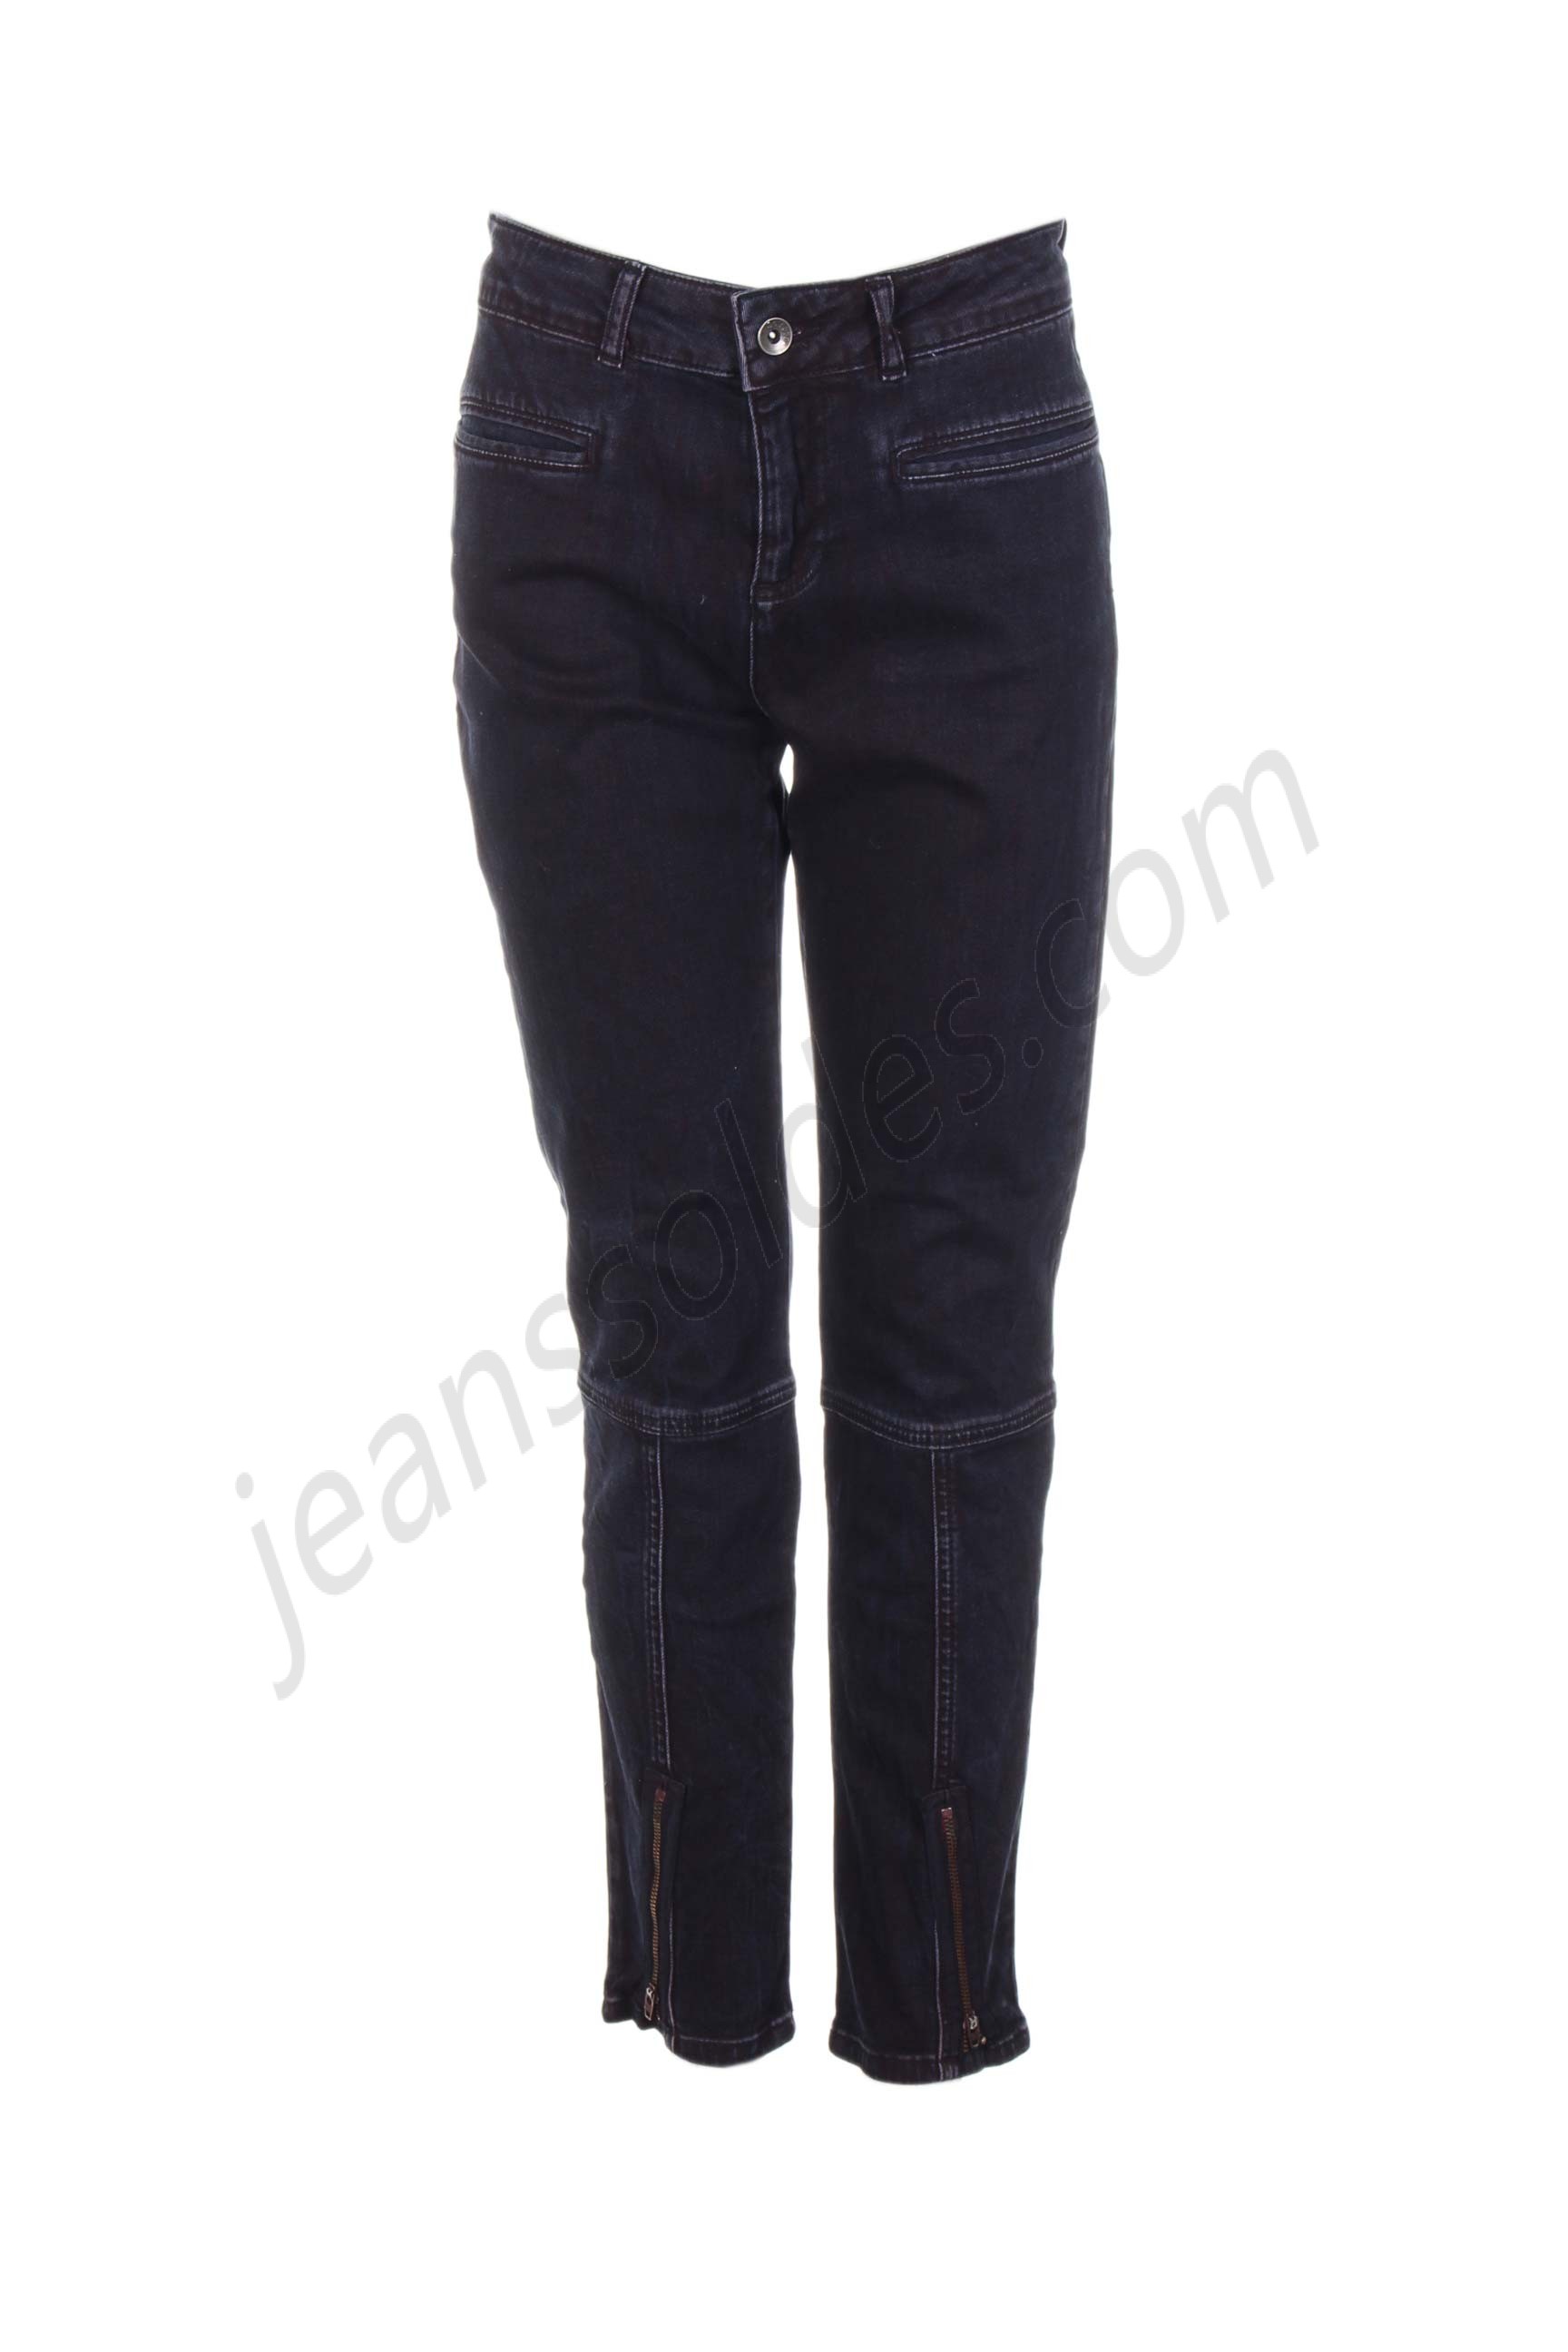 so soon-Jeans coupe droite prix d’amis - so soon-Jeans coupe droite prix d’amis